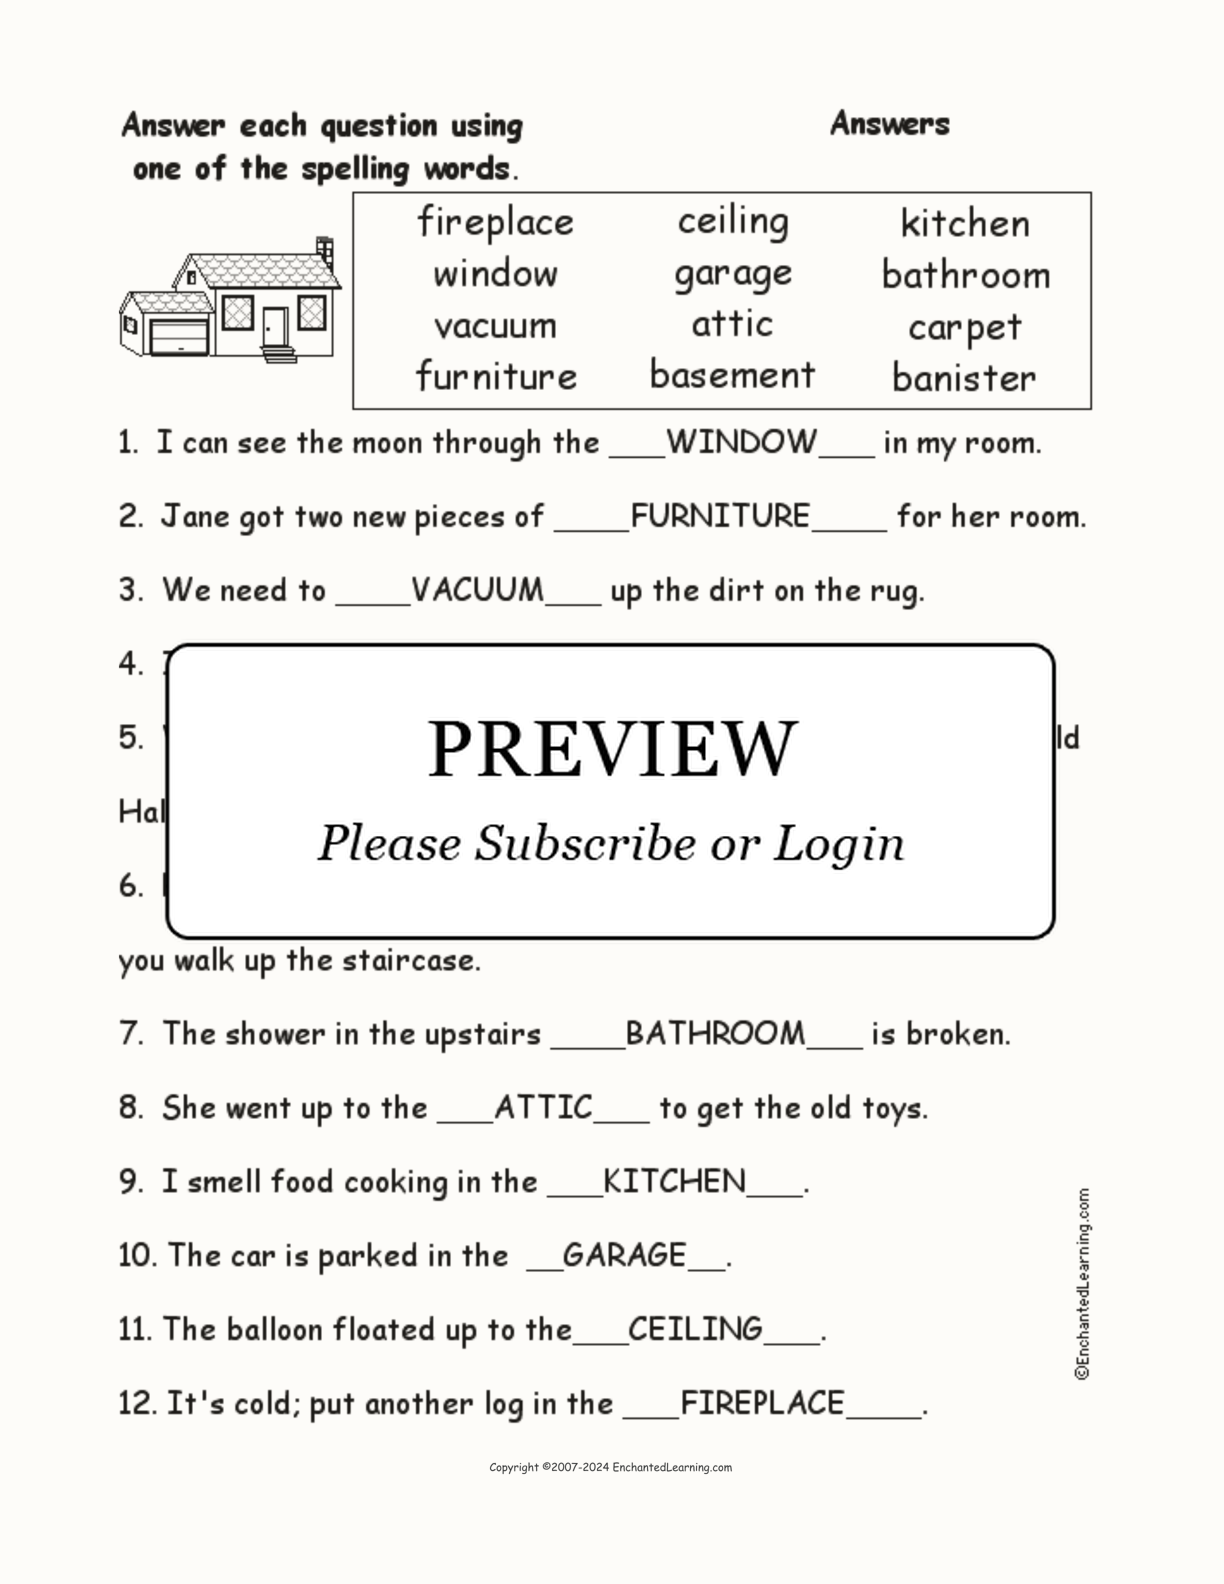 House Spelling Word Questions interactive worksheet page 2